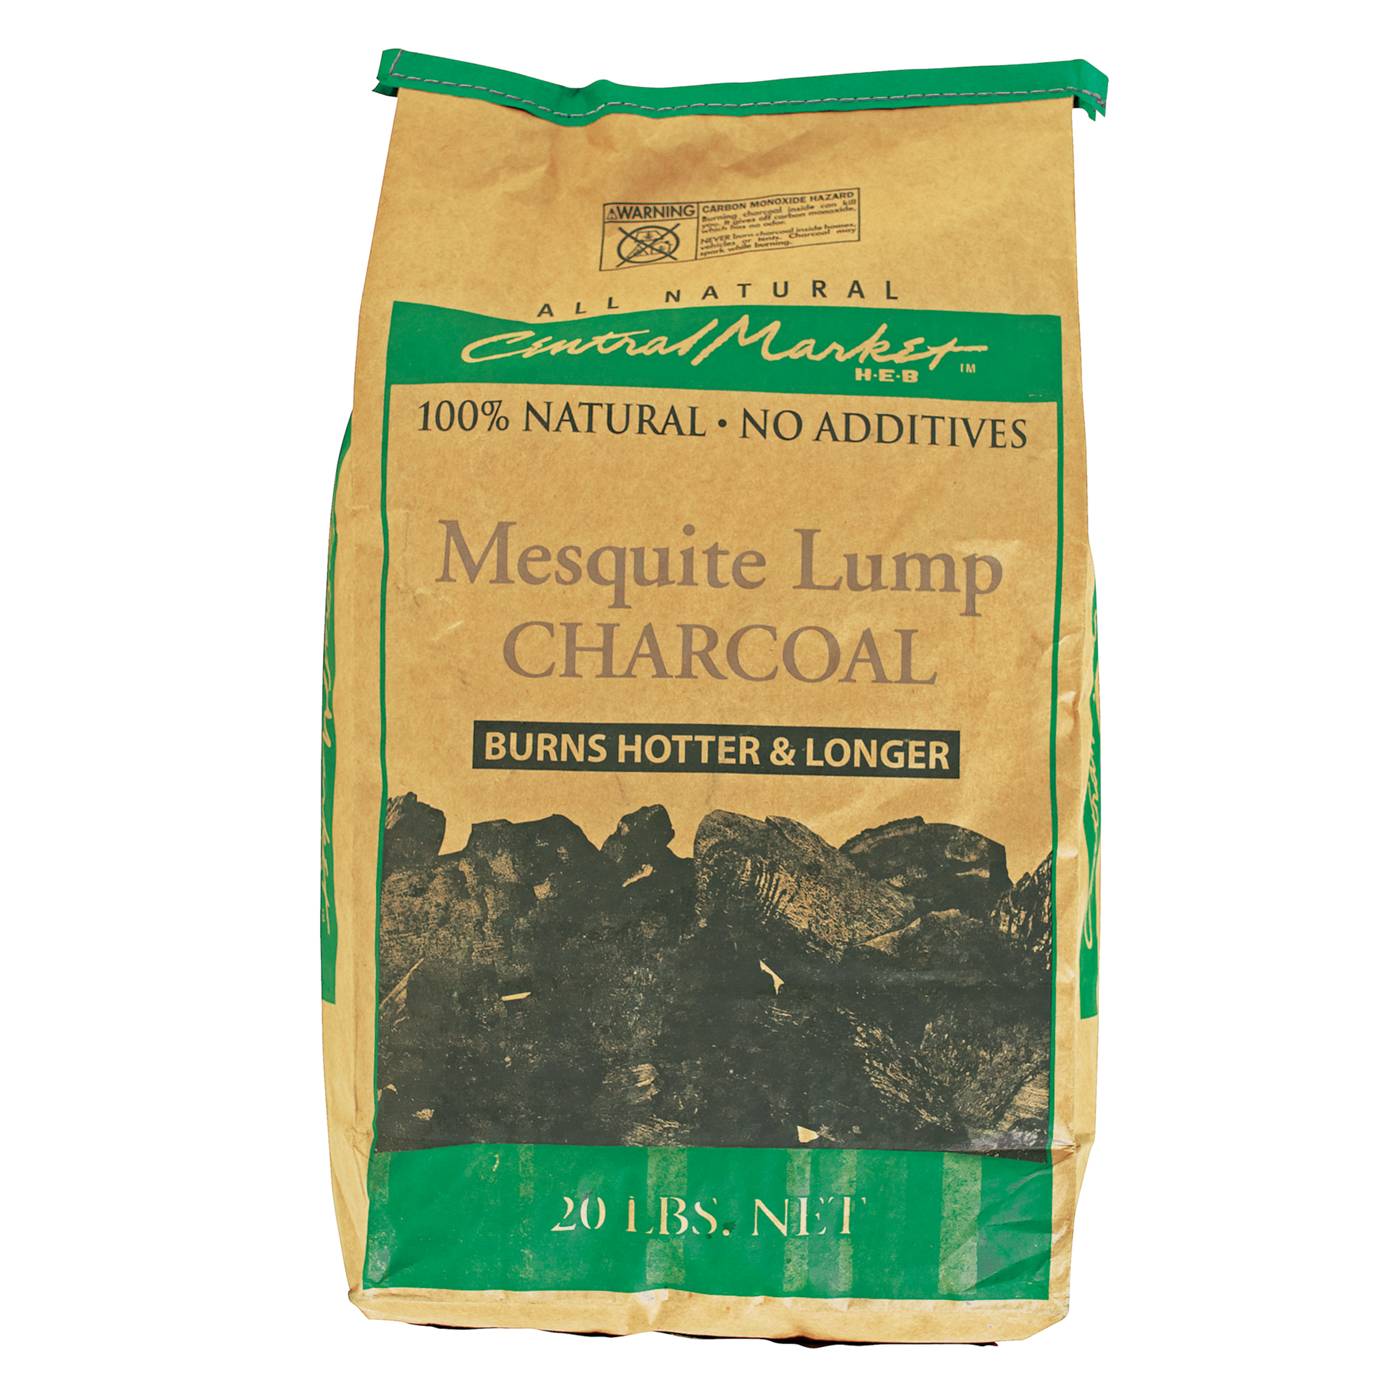 Central Market Mesquite Lump Charcoal; image 1 of 2